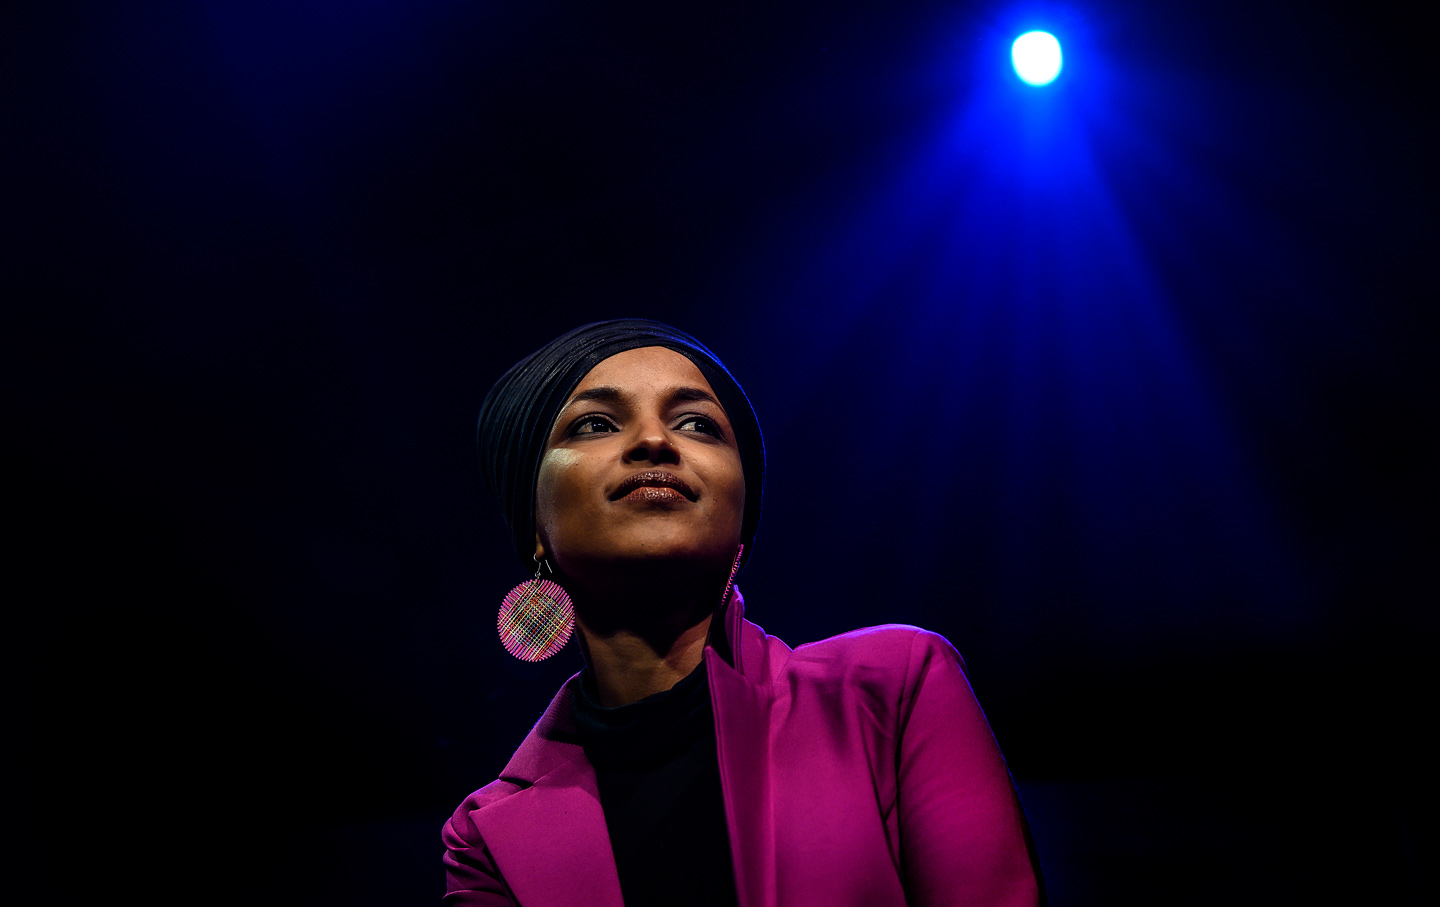 Republicans Lose Their Collective Mind Over Ilhan Omar’s Call to Dismantle ‘Systems of Oppression’